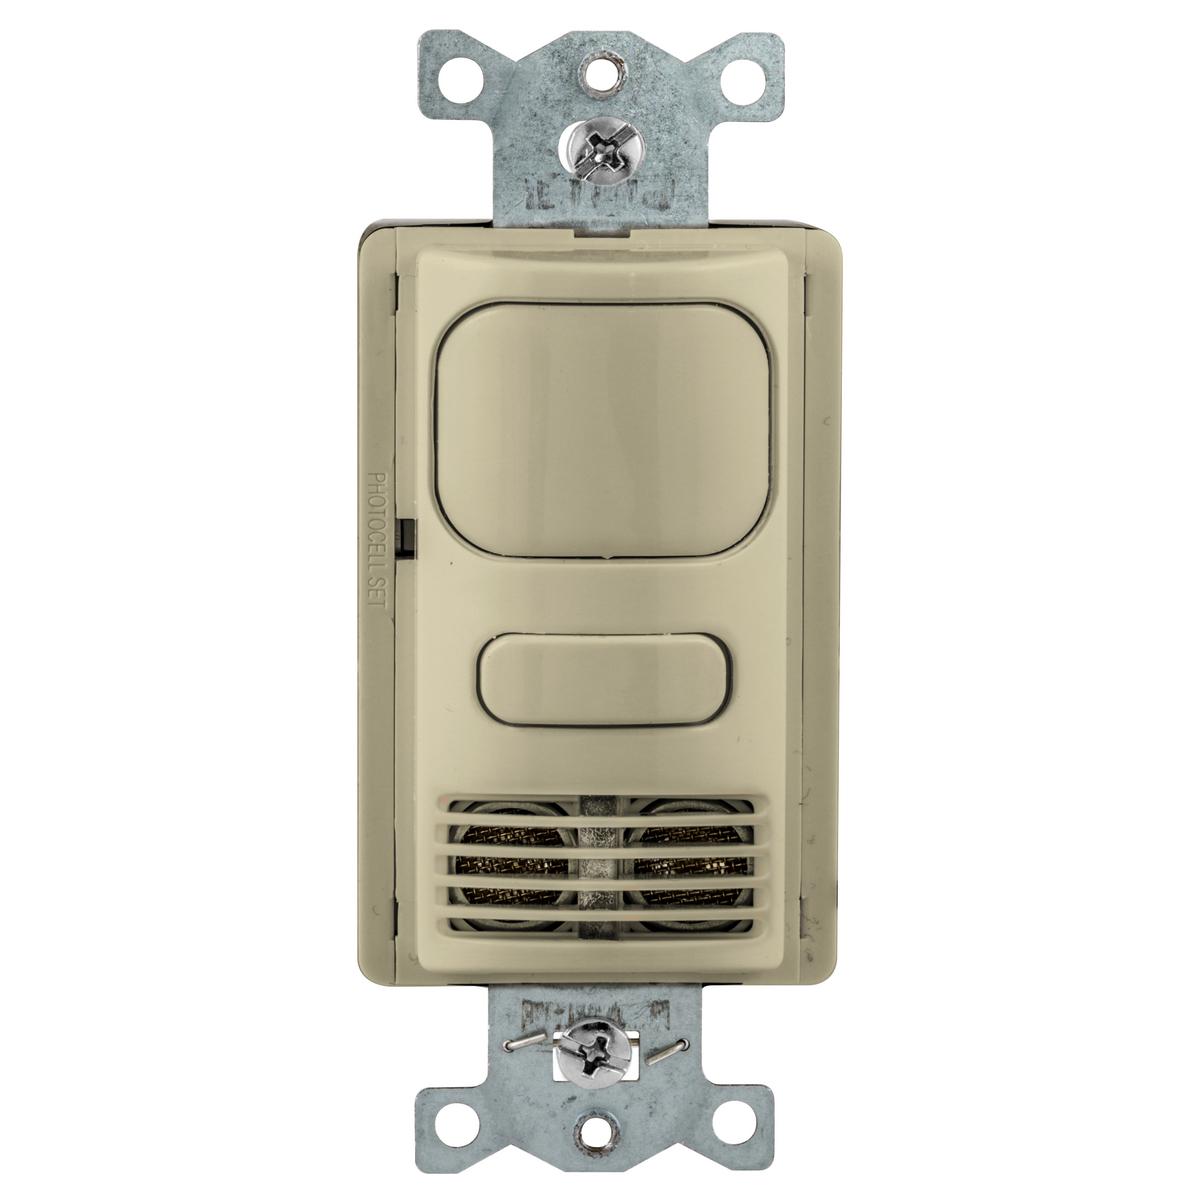 Hubbell AD2241I1 Vacancy Sensors, Wall Switch, AdaptiveDual Technology, 1 Circuit, 24V DC, Ivory 